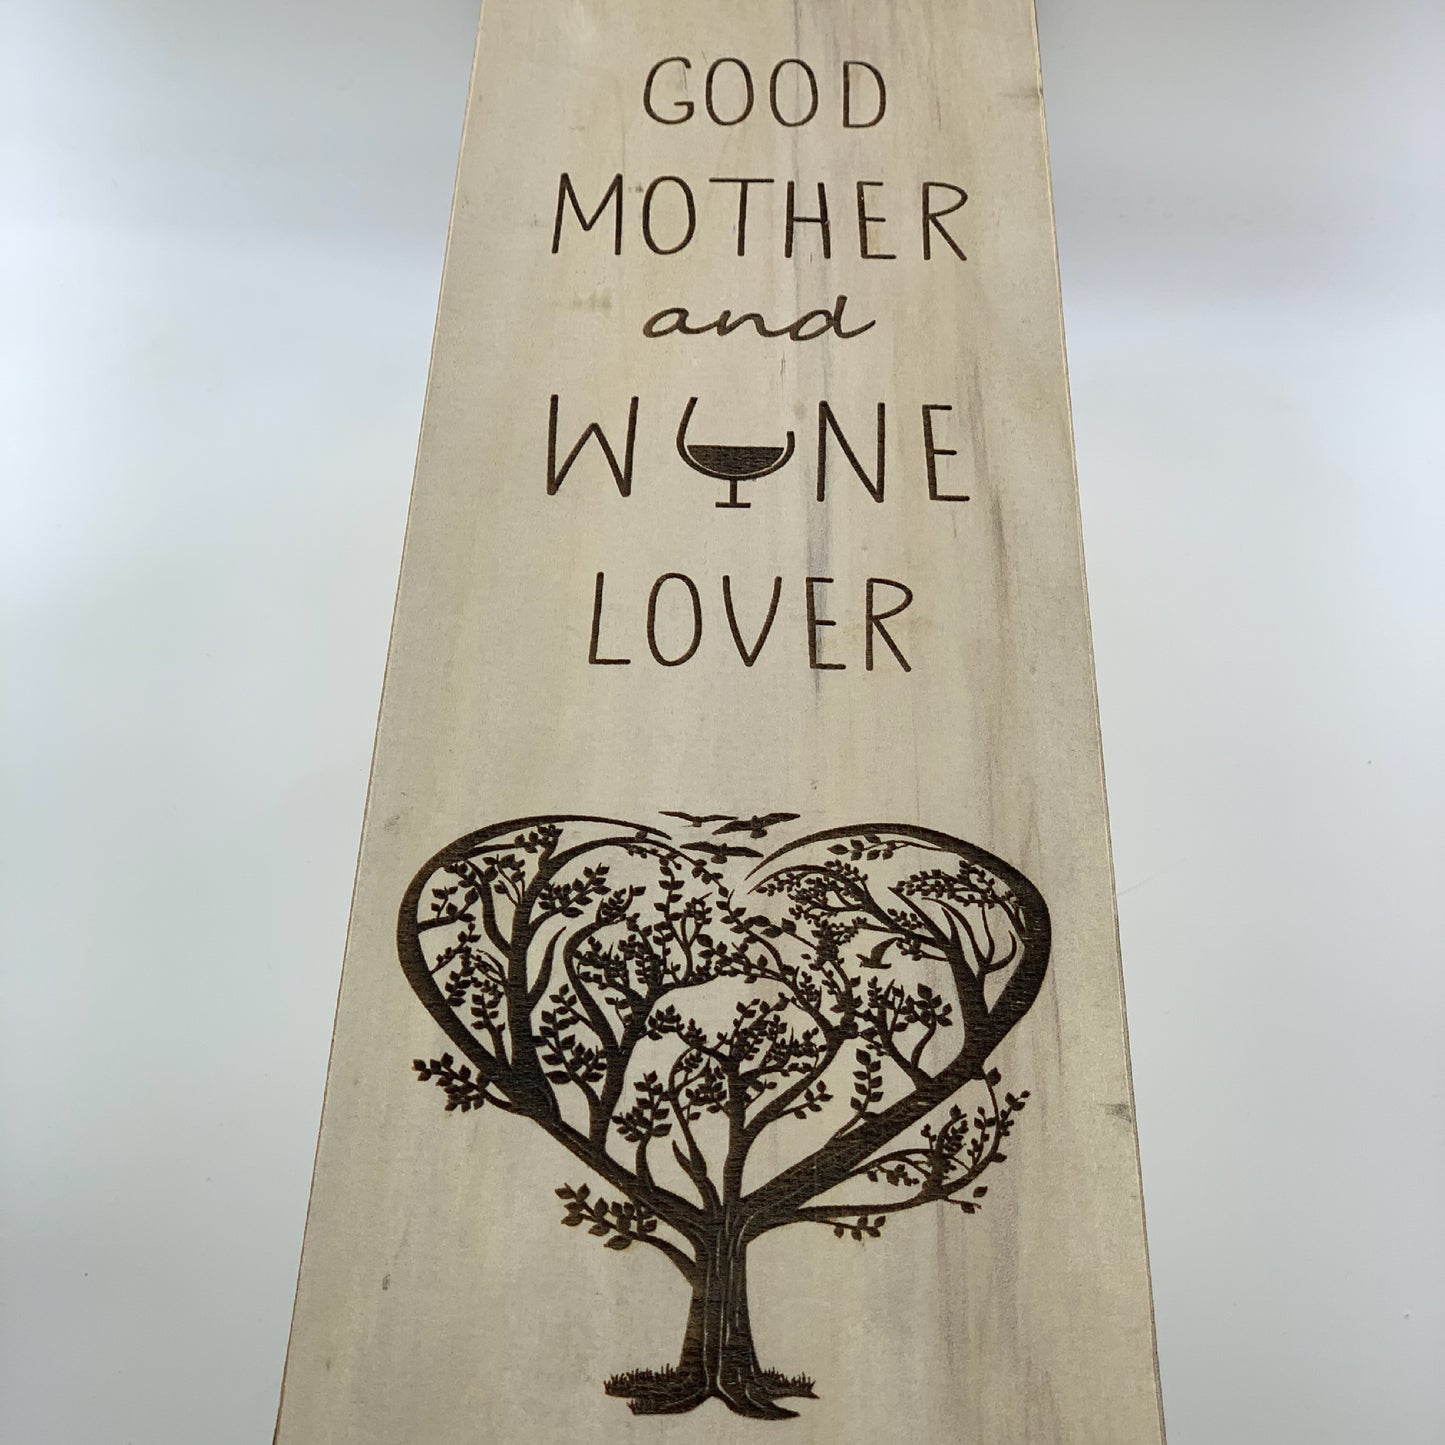 Mother's Day gift ideas, Custom wine box, Personalized gift, Unique Mother's Day present, Customizable box, Wine box gift, Mother's Day gift